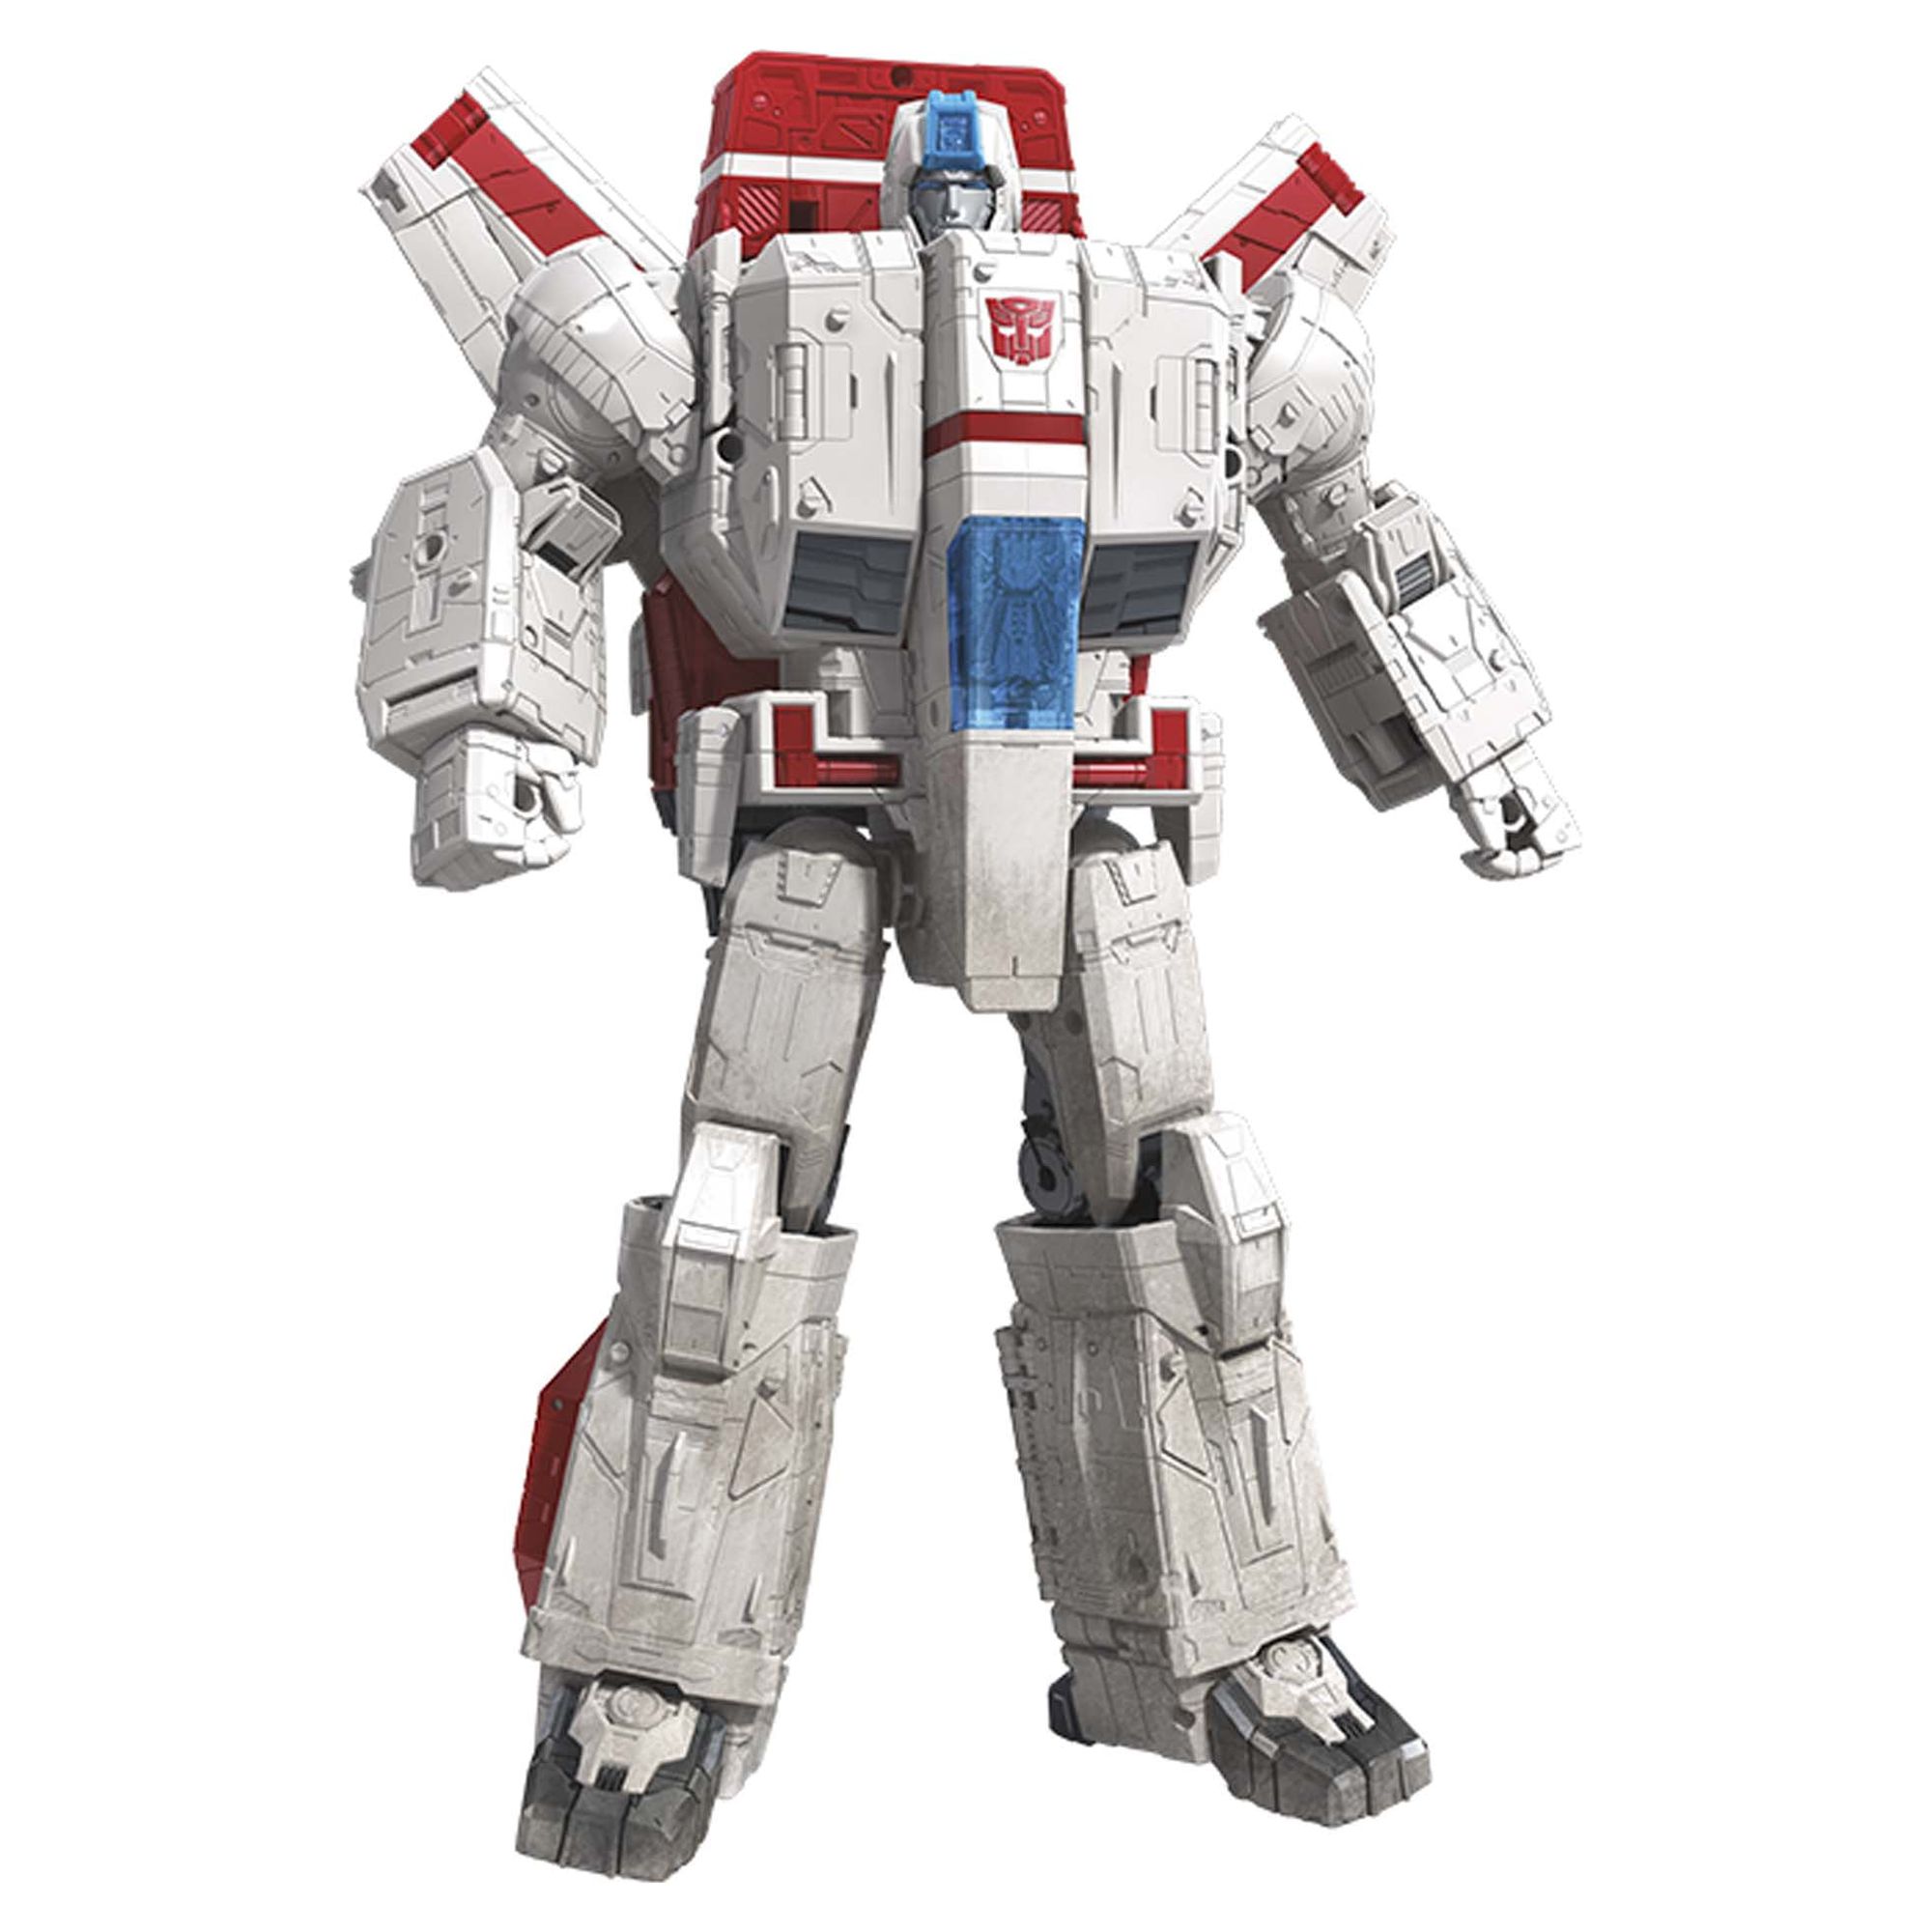 Transformers Generations War for Cybertron Commander WFC-S28 Jetfire Figure - image 1 of 13